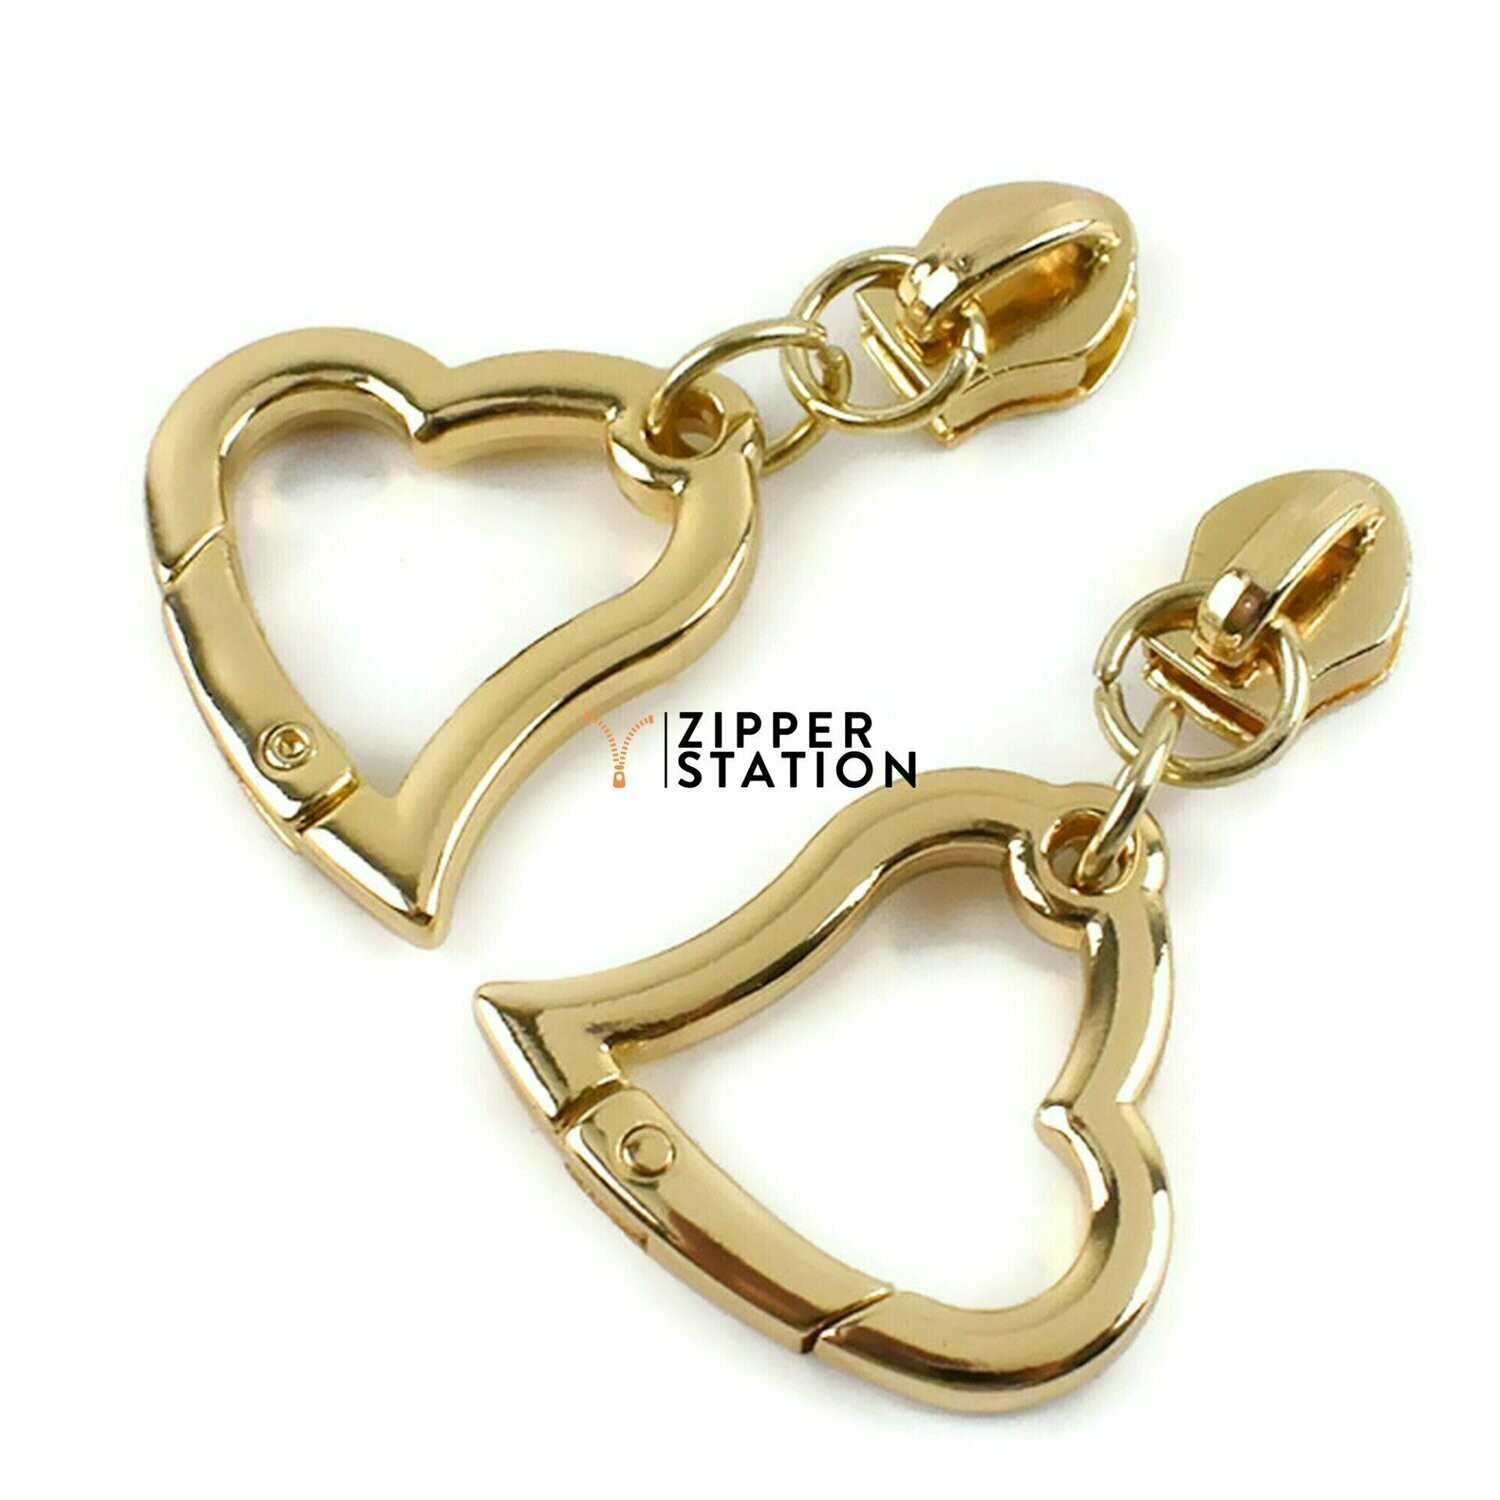 #5 Nylon Coil Zip Sliders/Pulls - Heart with Clasp